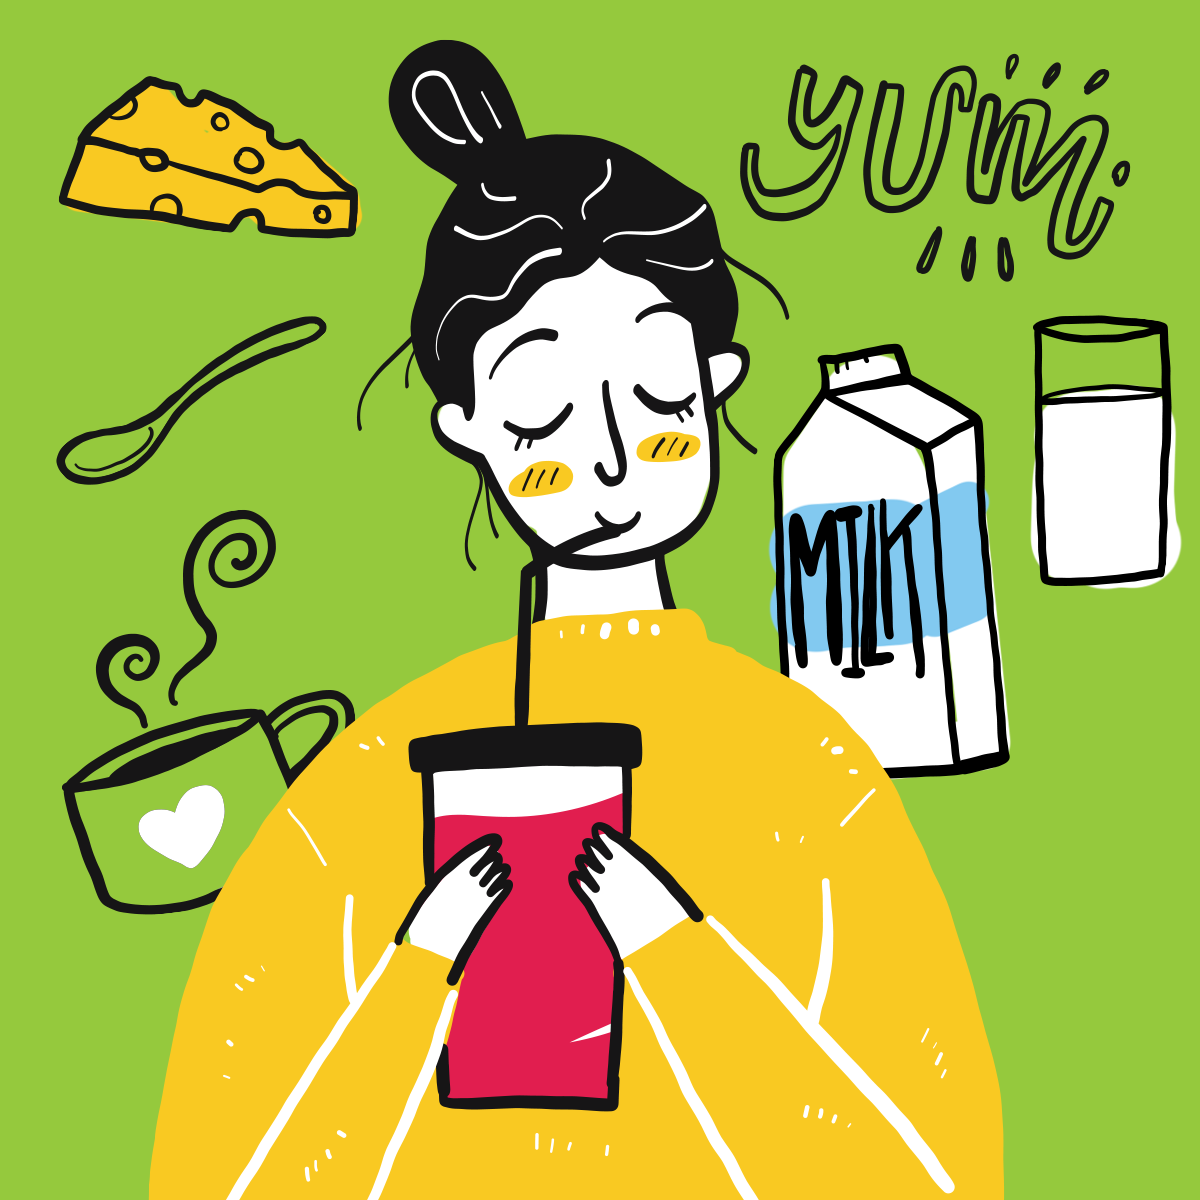 Illustration of a woman drinking from a cup surrounded by dairy products